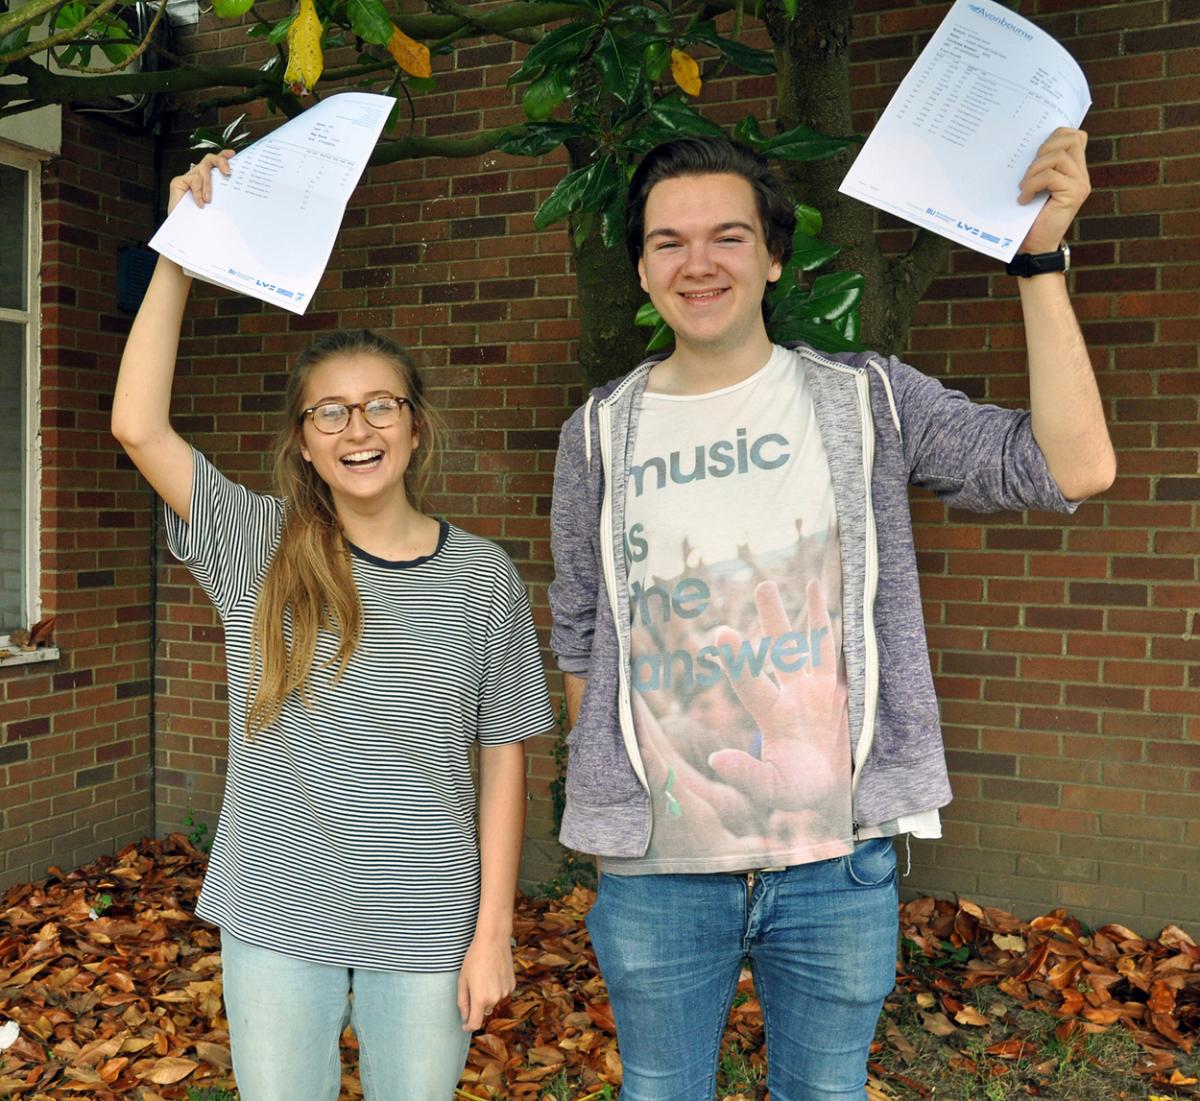 A Level results day at Avonbourne School 